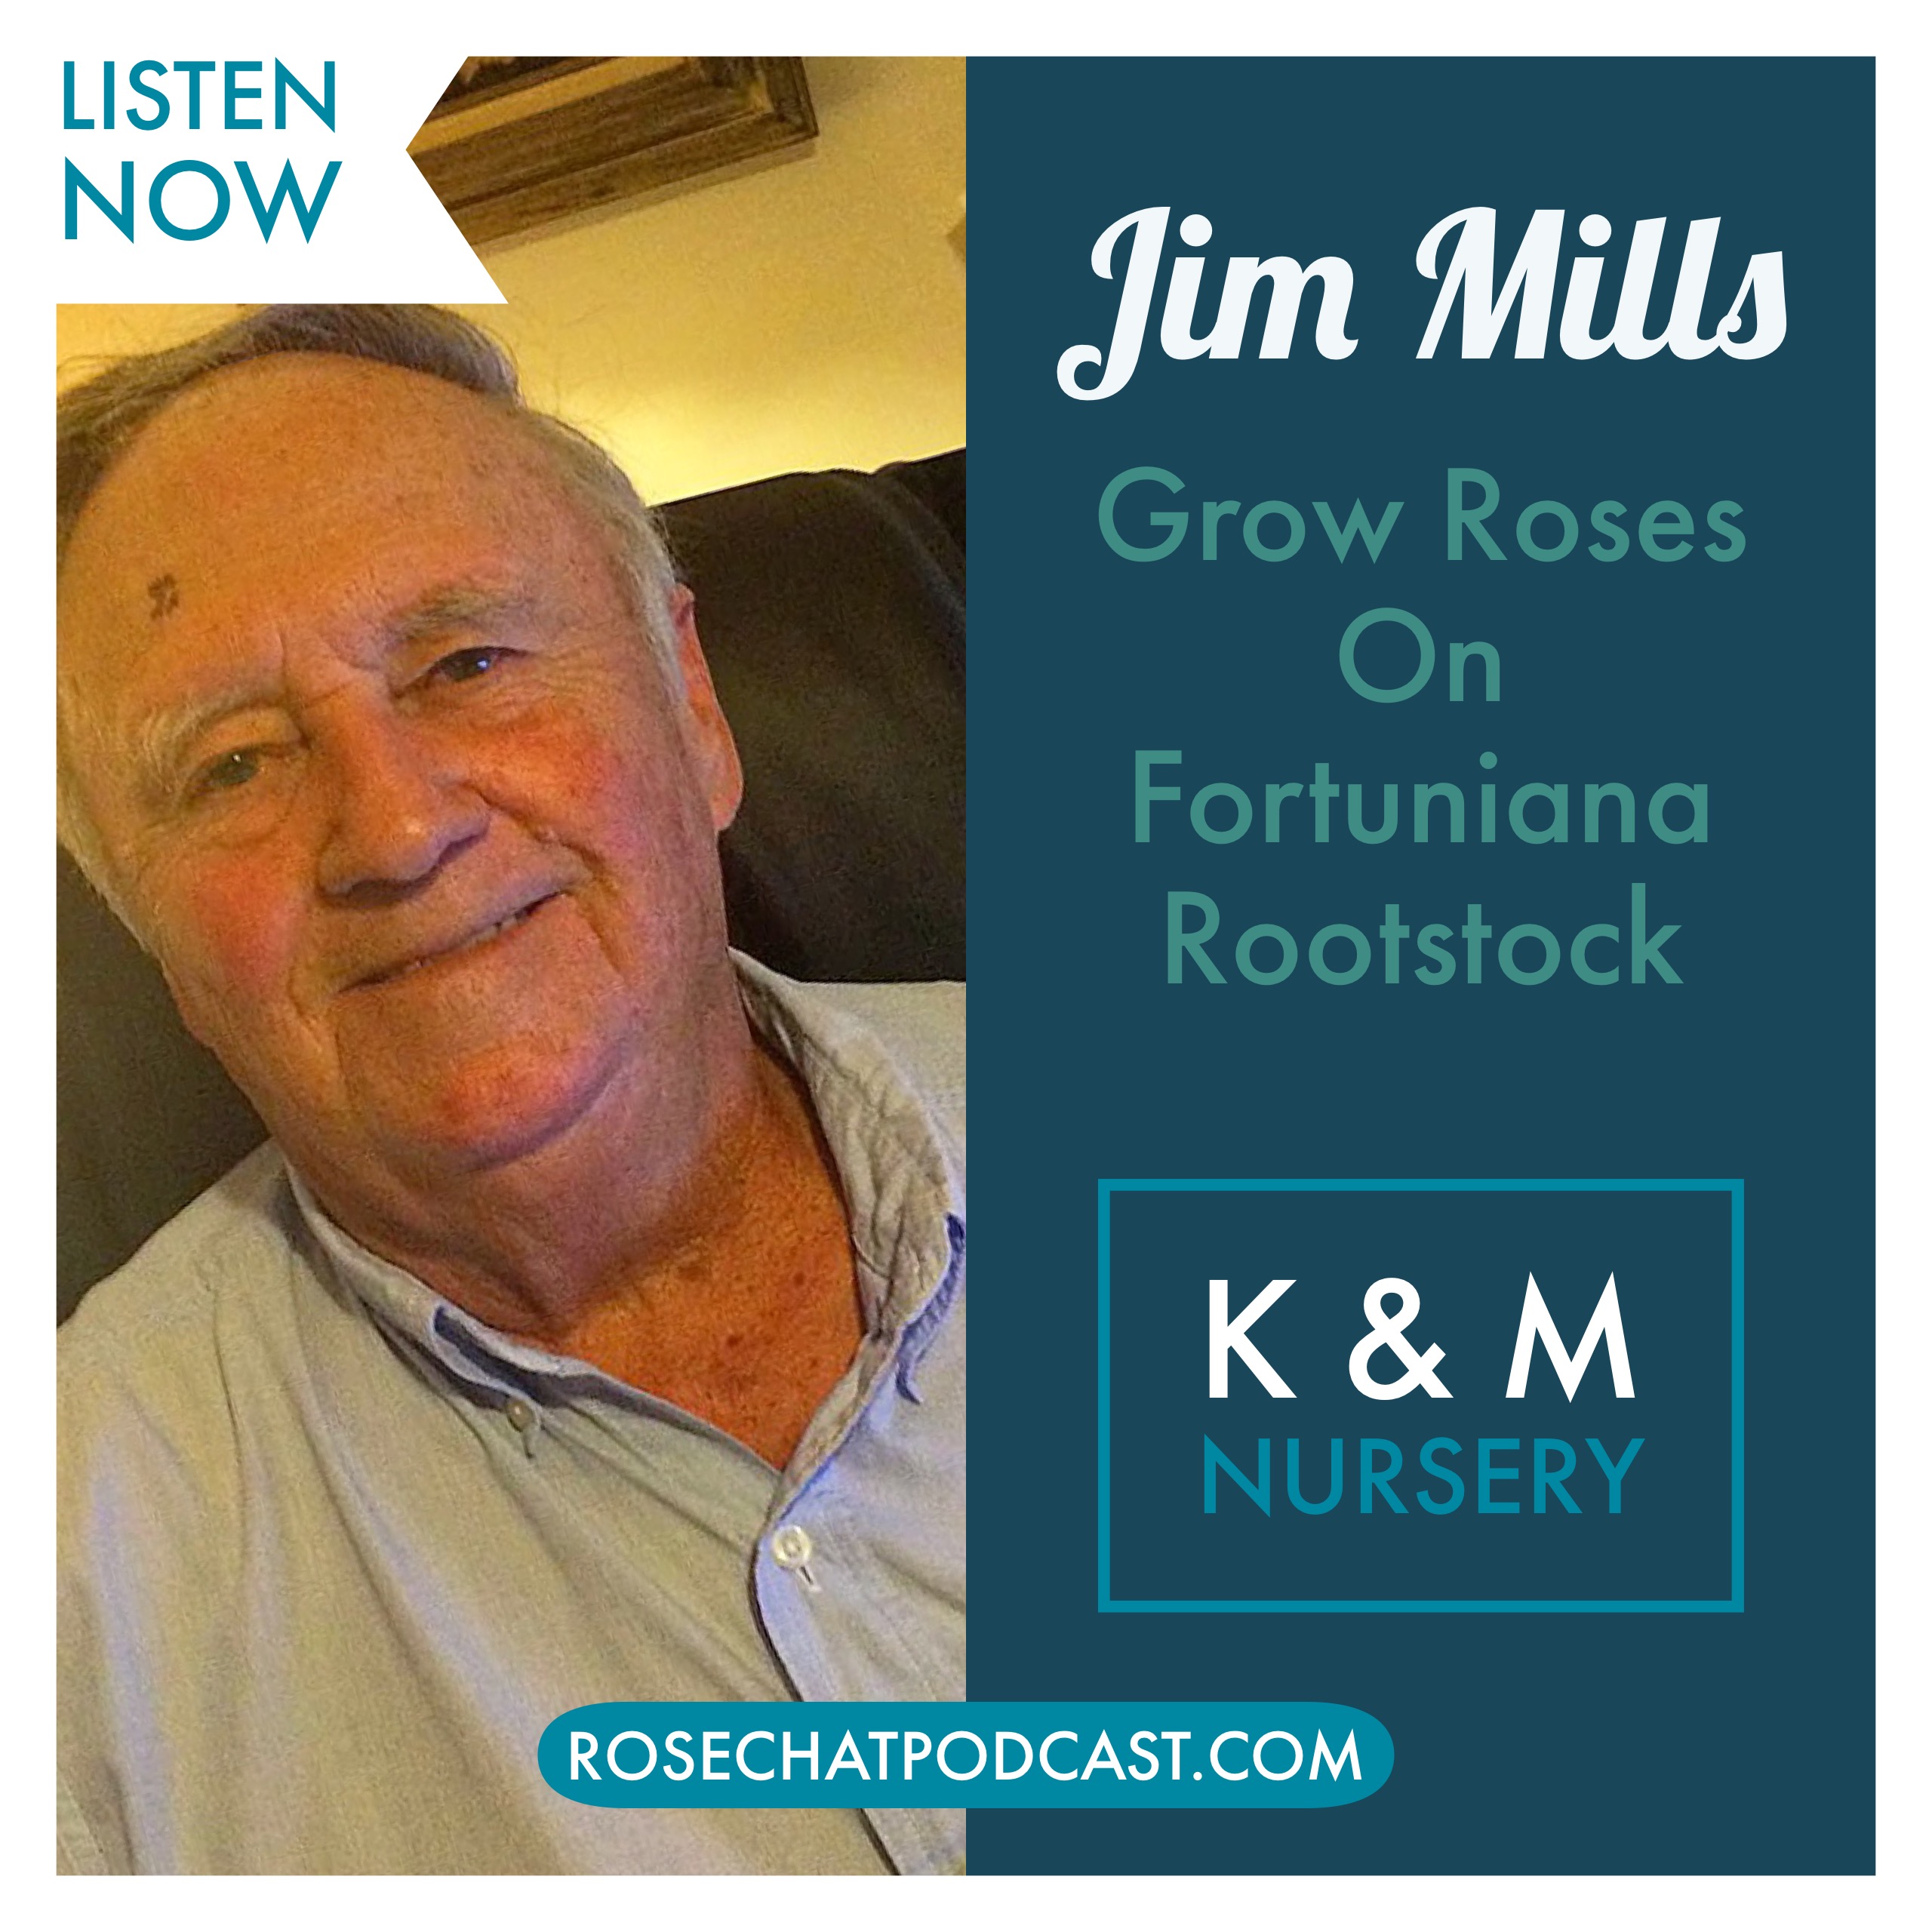 Jim Mills | K & M Roses | Growing Roses on Fortuniana Rootstock